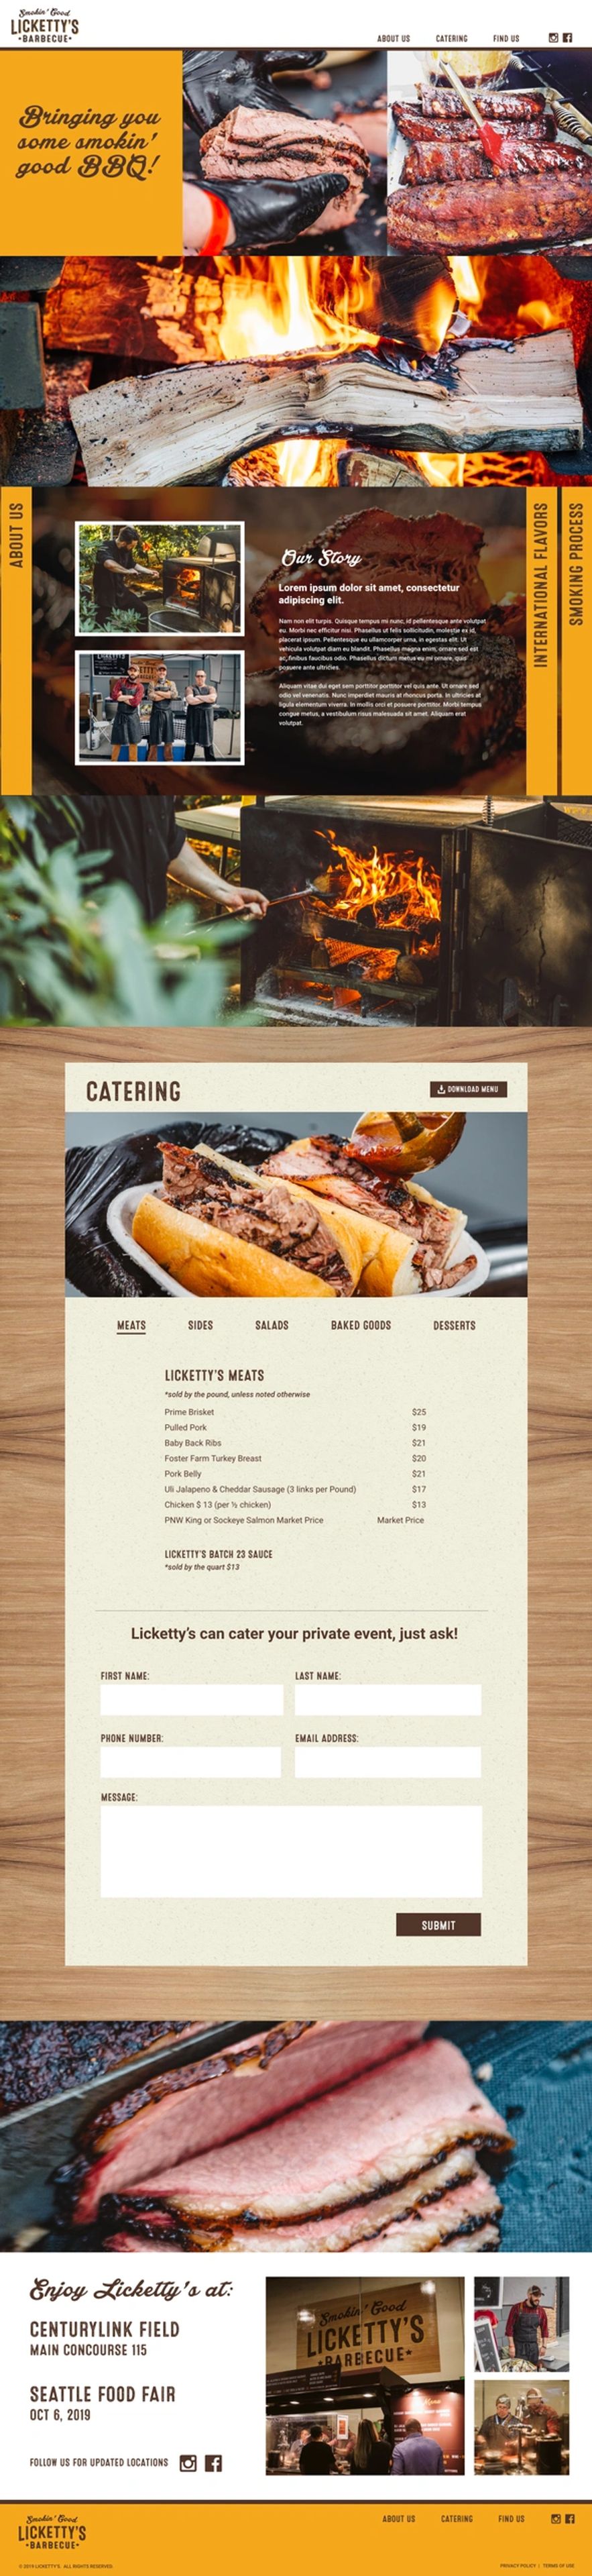 Beautiful and delicious photos of BBQ brisket, ribs, sandwiches, and an open flame grill.